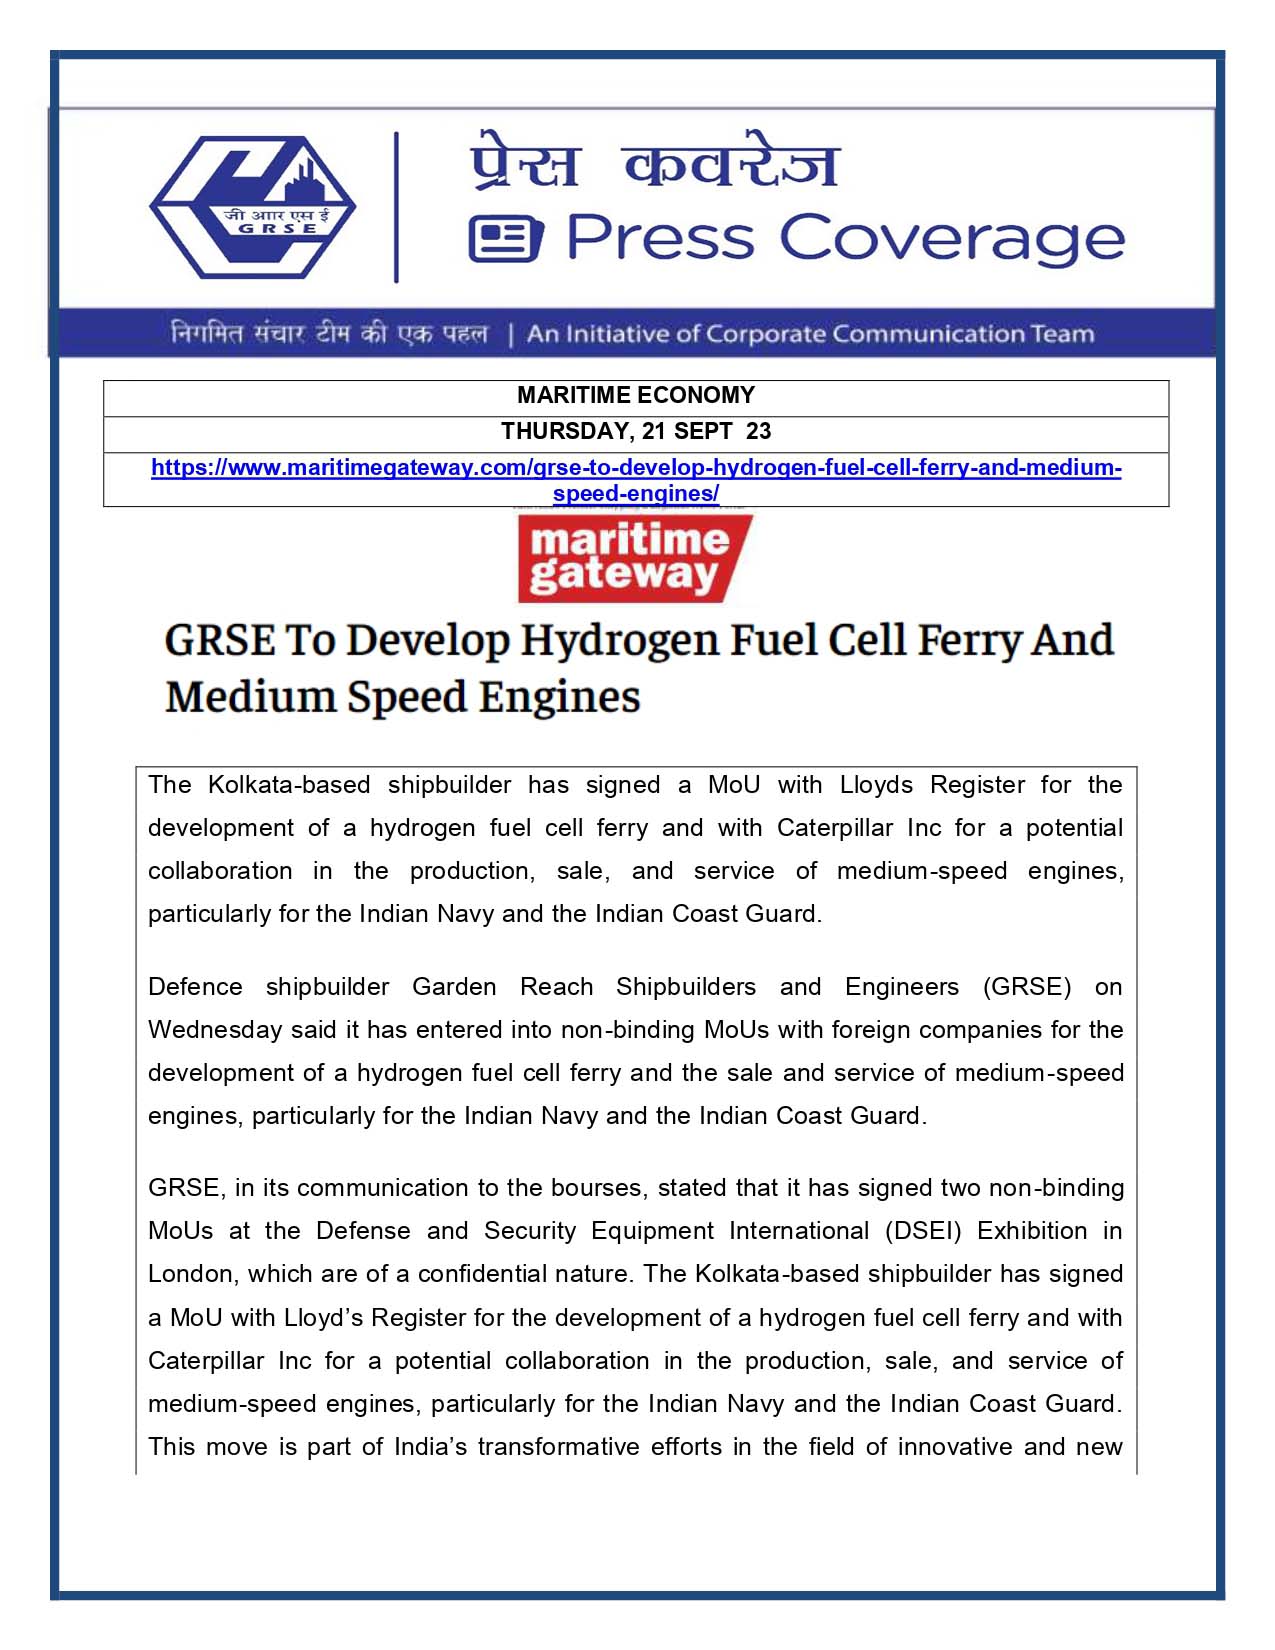 Press Coverage : Maritime Economy, 21 Sep 23 : GRSE to develop Hydrogen Fuel Cell Ferry and Medium Speed Engines